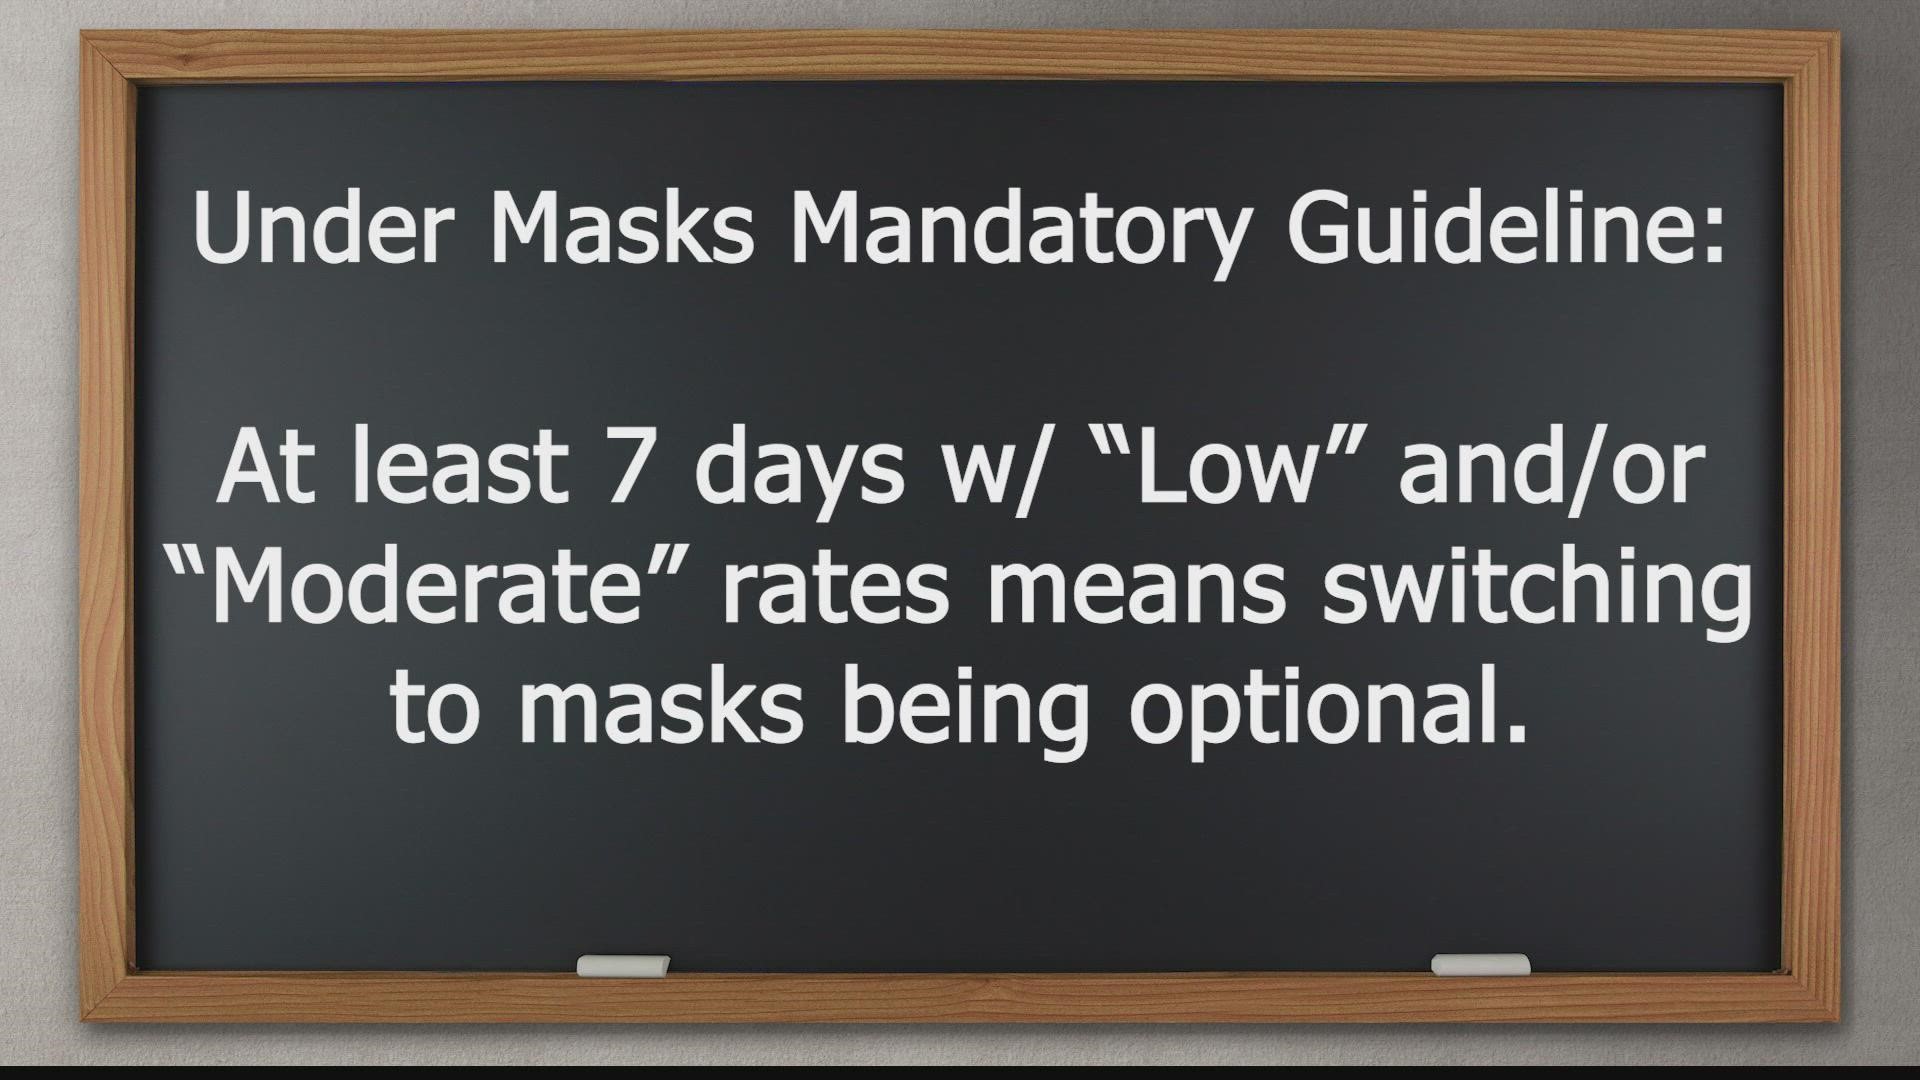 The Masking Matrix procedure is set to go into effect on January 4, 2022, and the district will begin the second semester as mask mandatory.